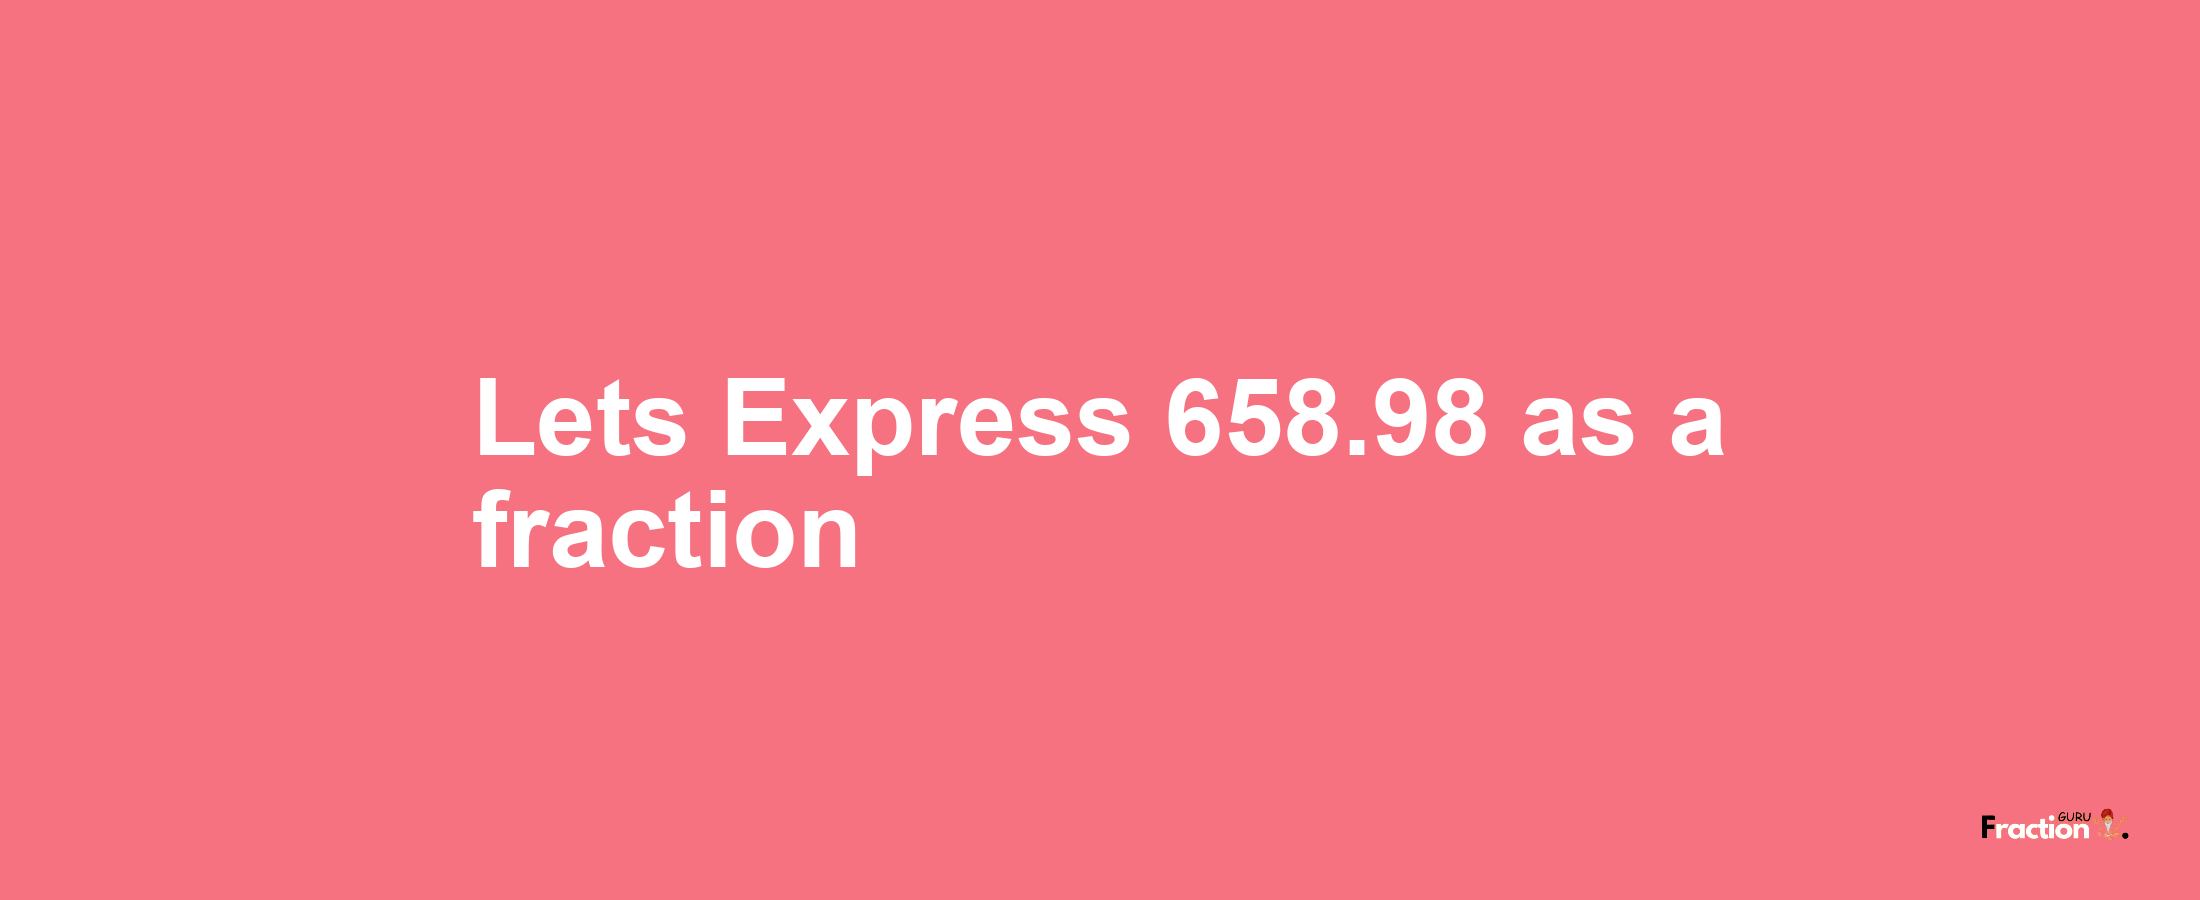 Lets Express 658.98 as afraction